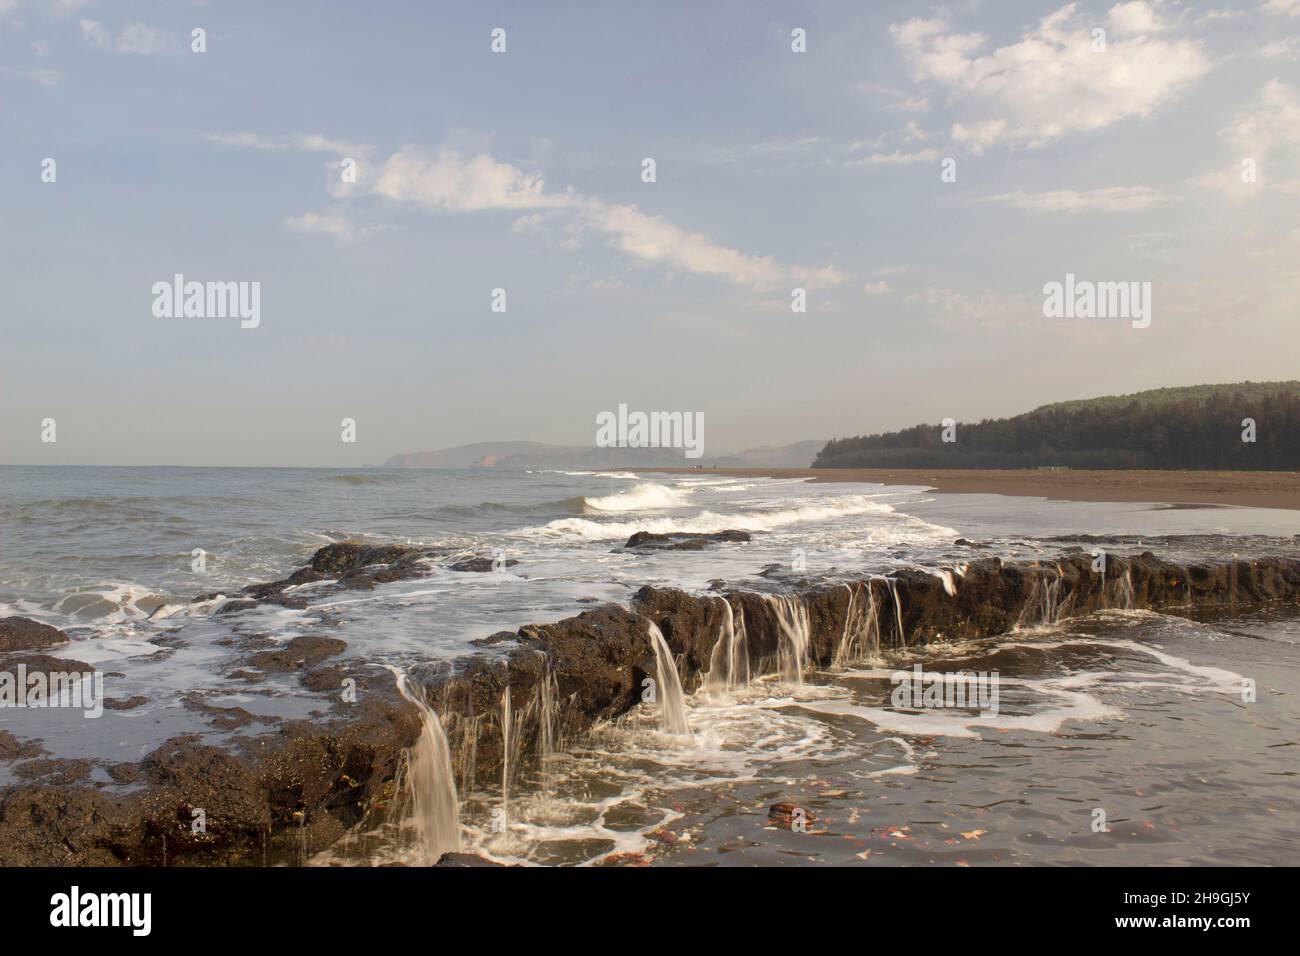 Velas beach view. Famous as a Olive Ridley turtle hatching site in west coast of India. Ratnagiri, Maharashtra, India Stock Photo